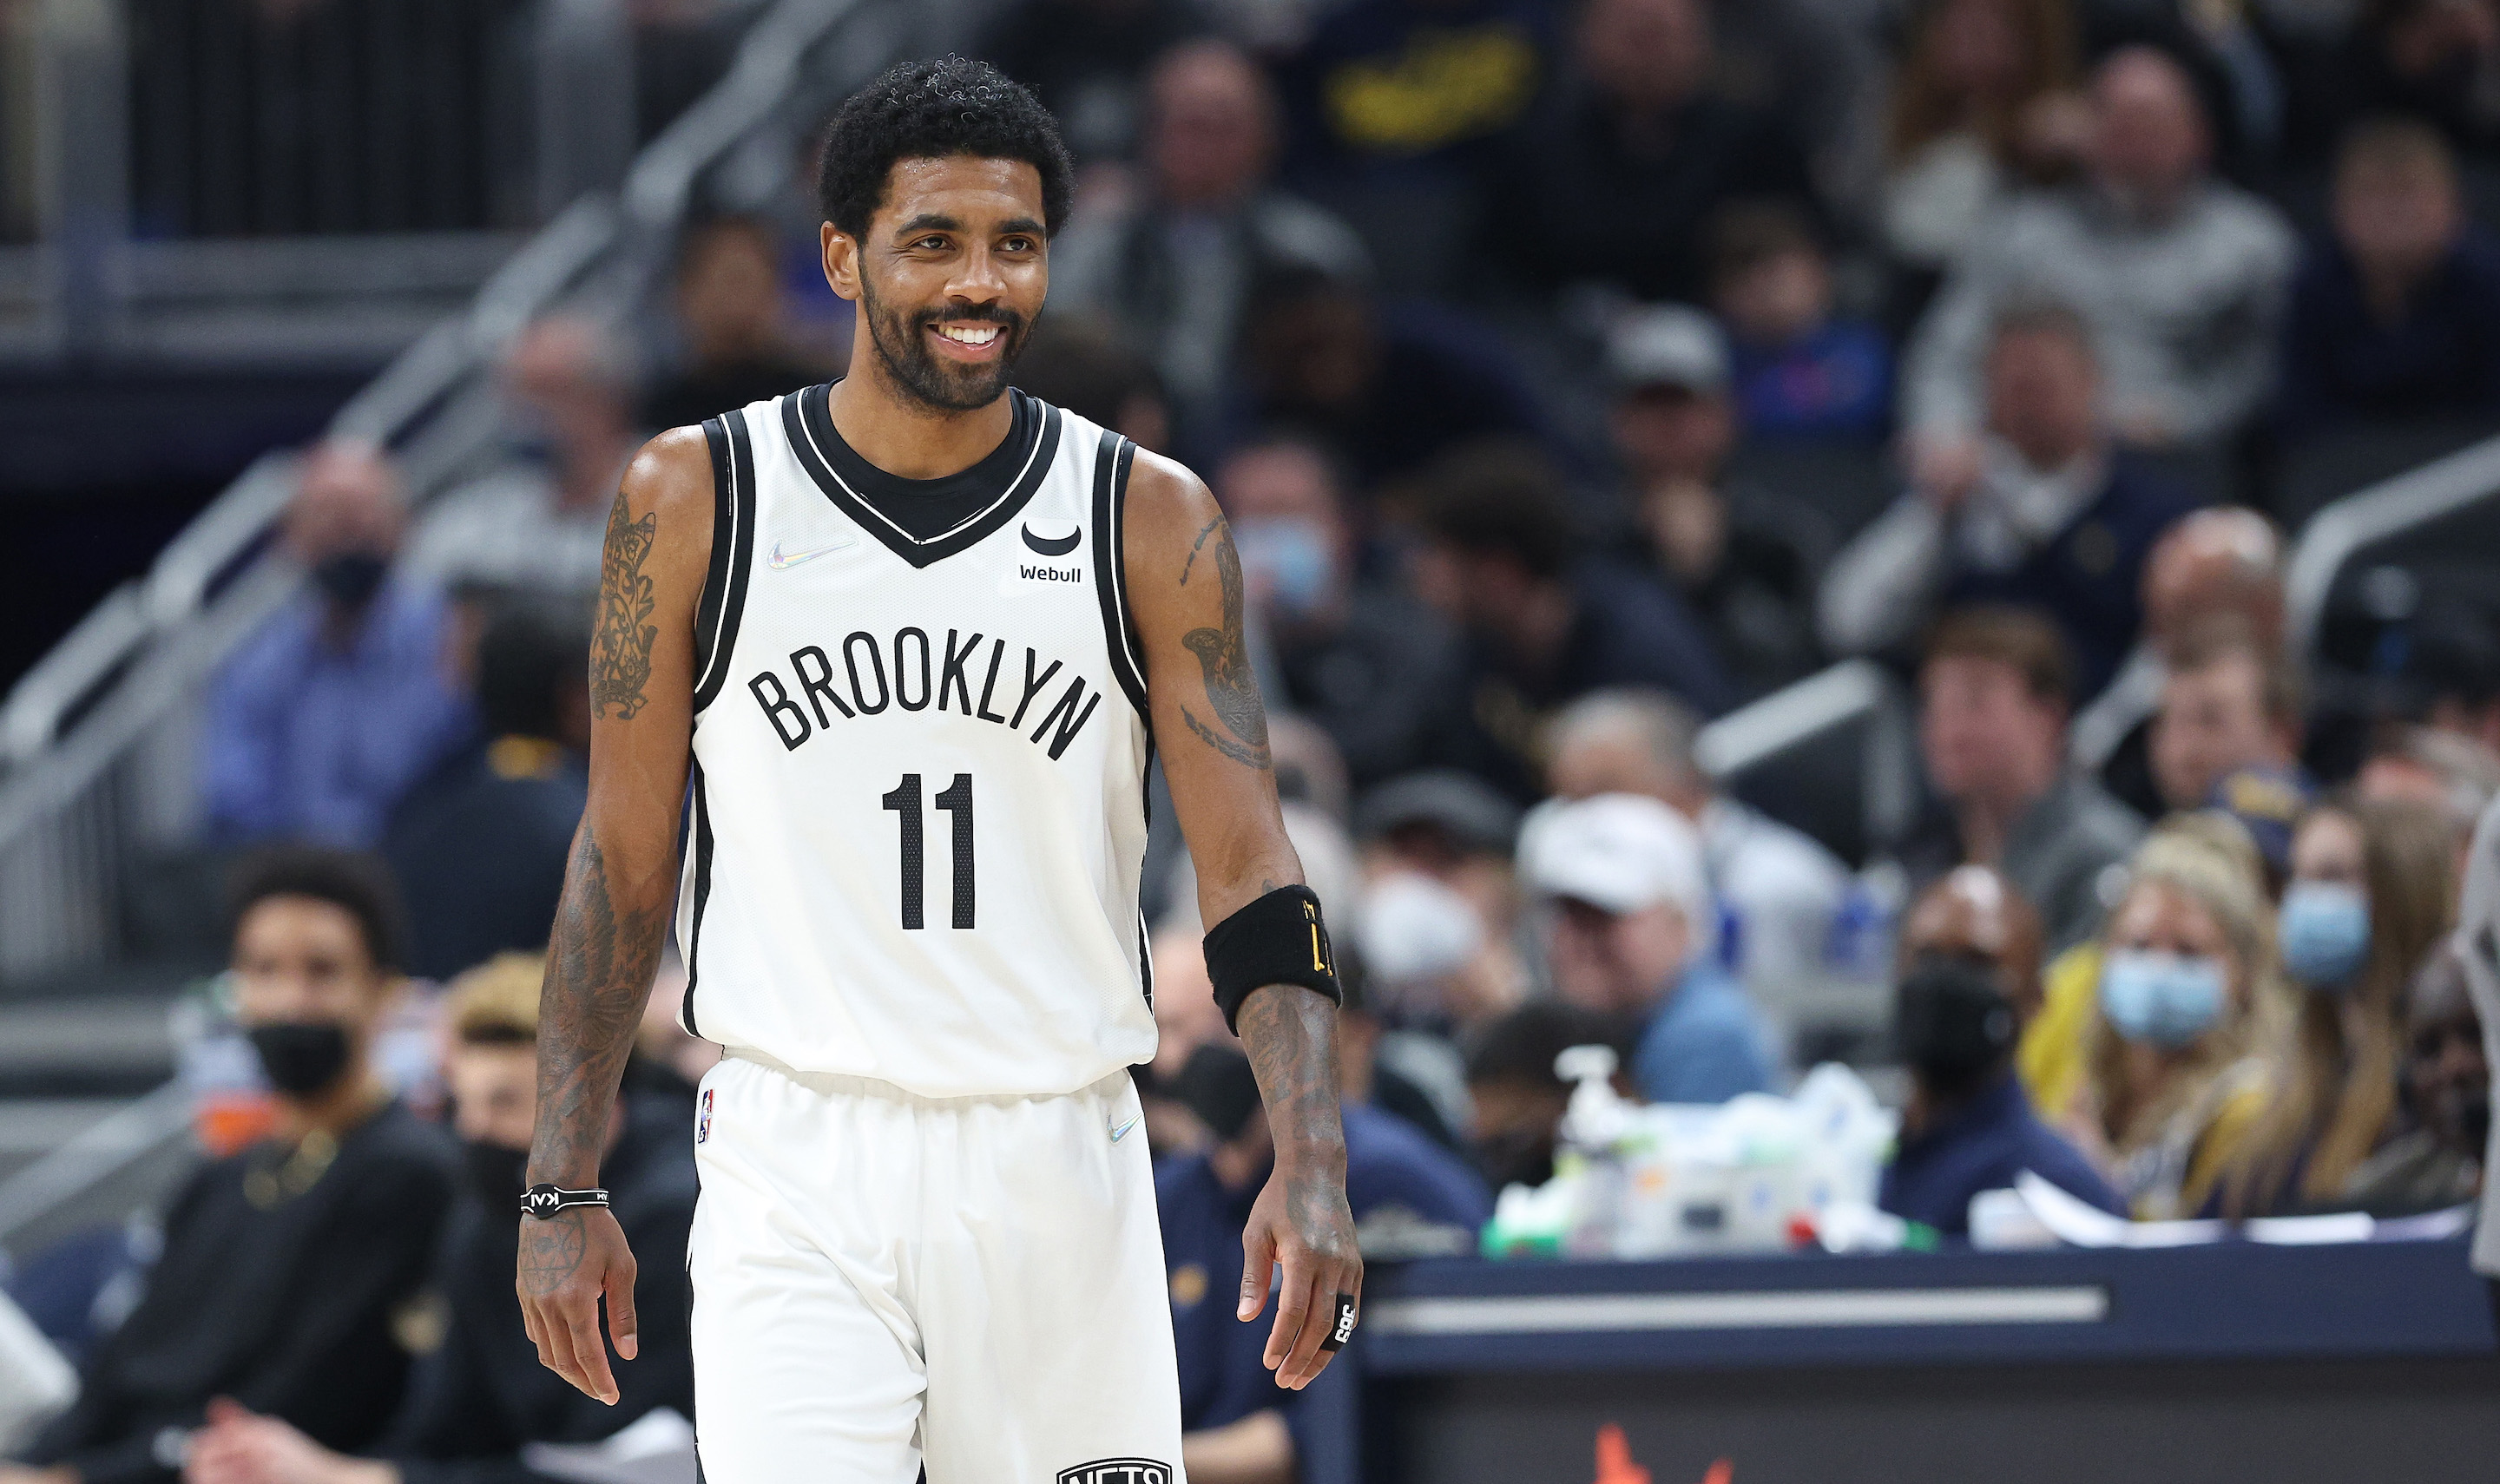 Brooklyn Nets guard Kyrie Irving smiles during an NBA game against the Indiana Pacers